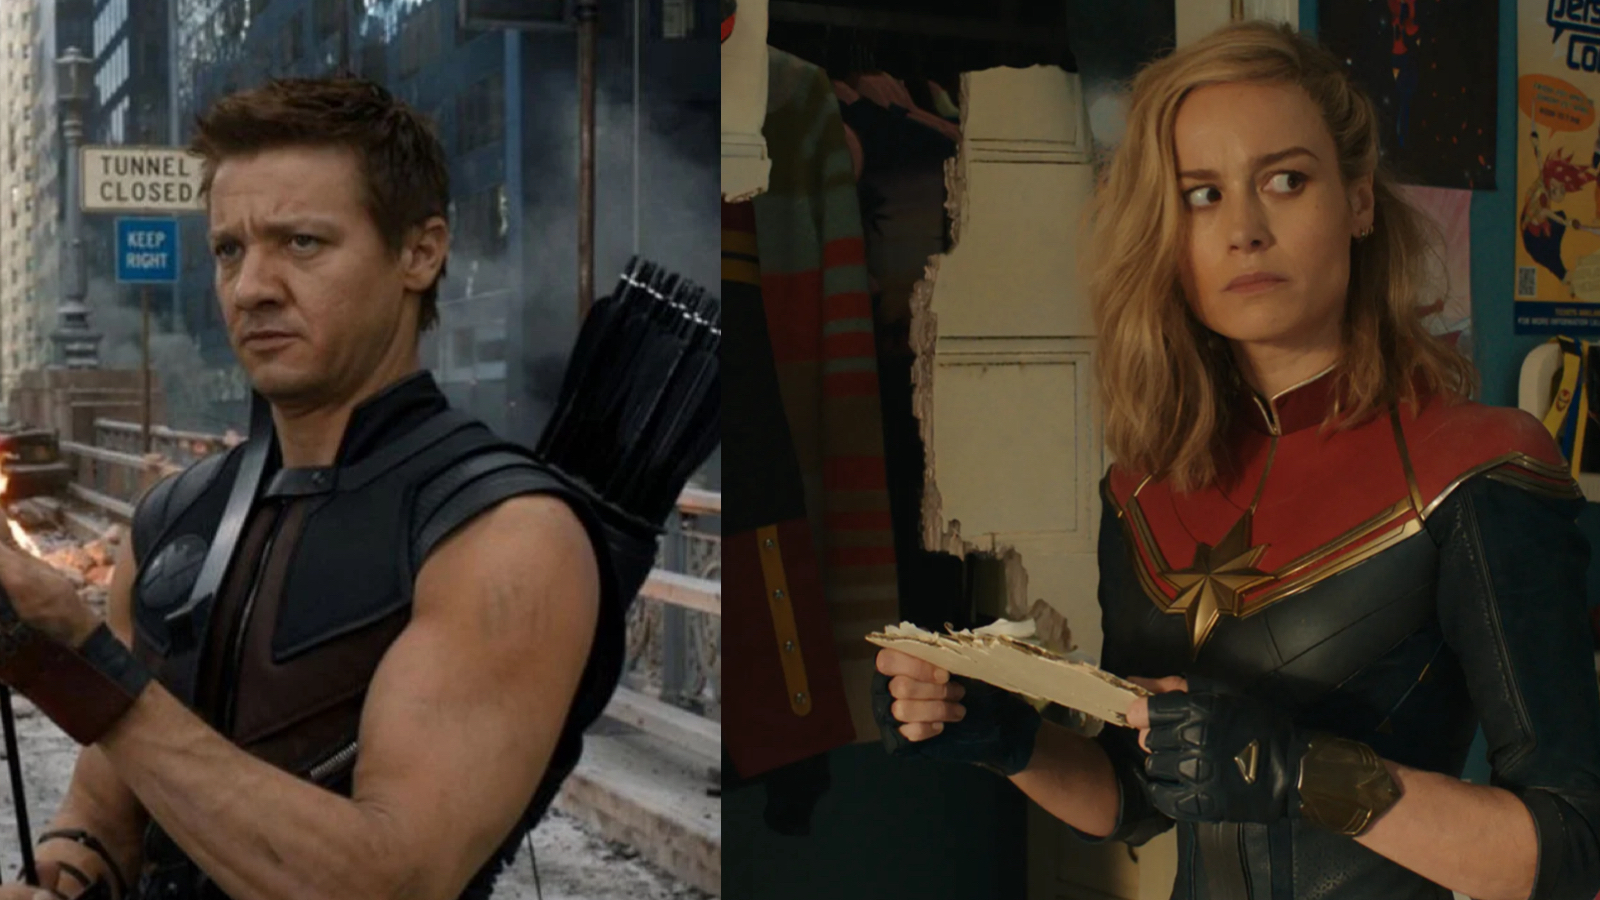 Marvels Producer Confirms Link With Hawkeye